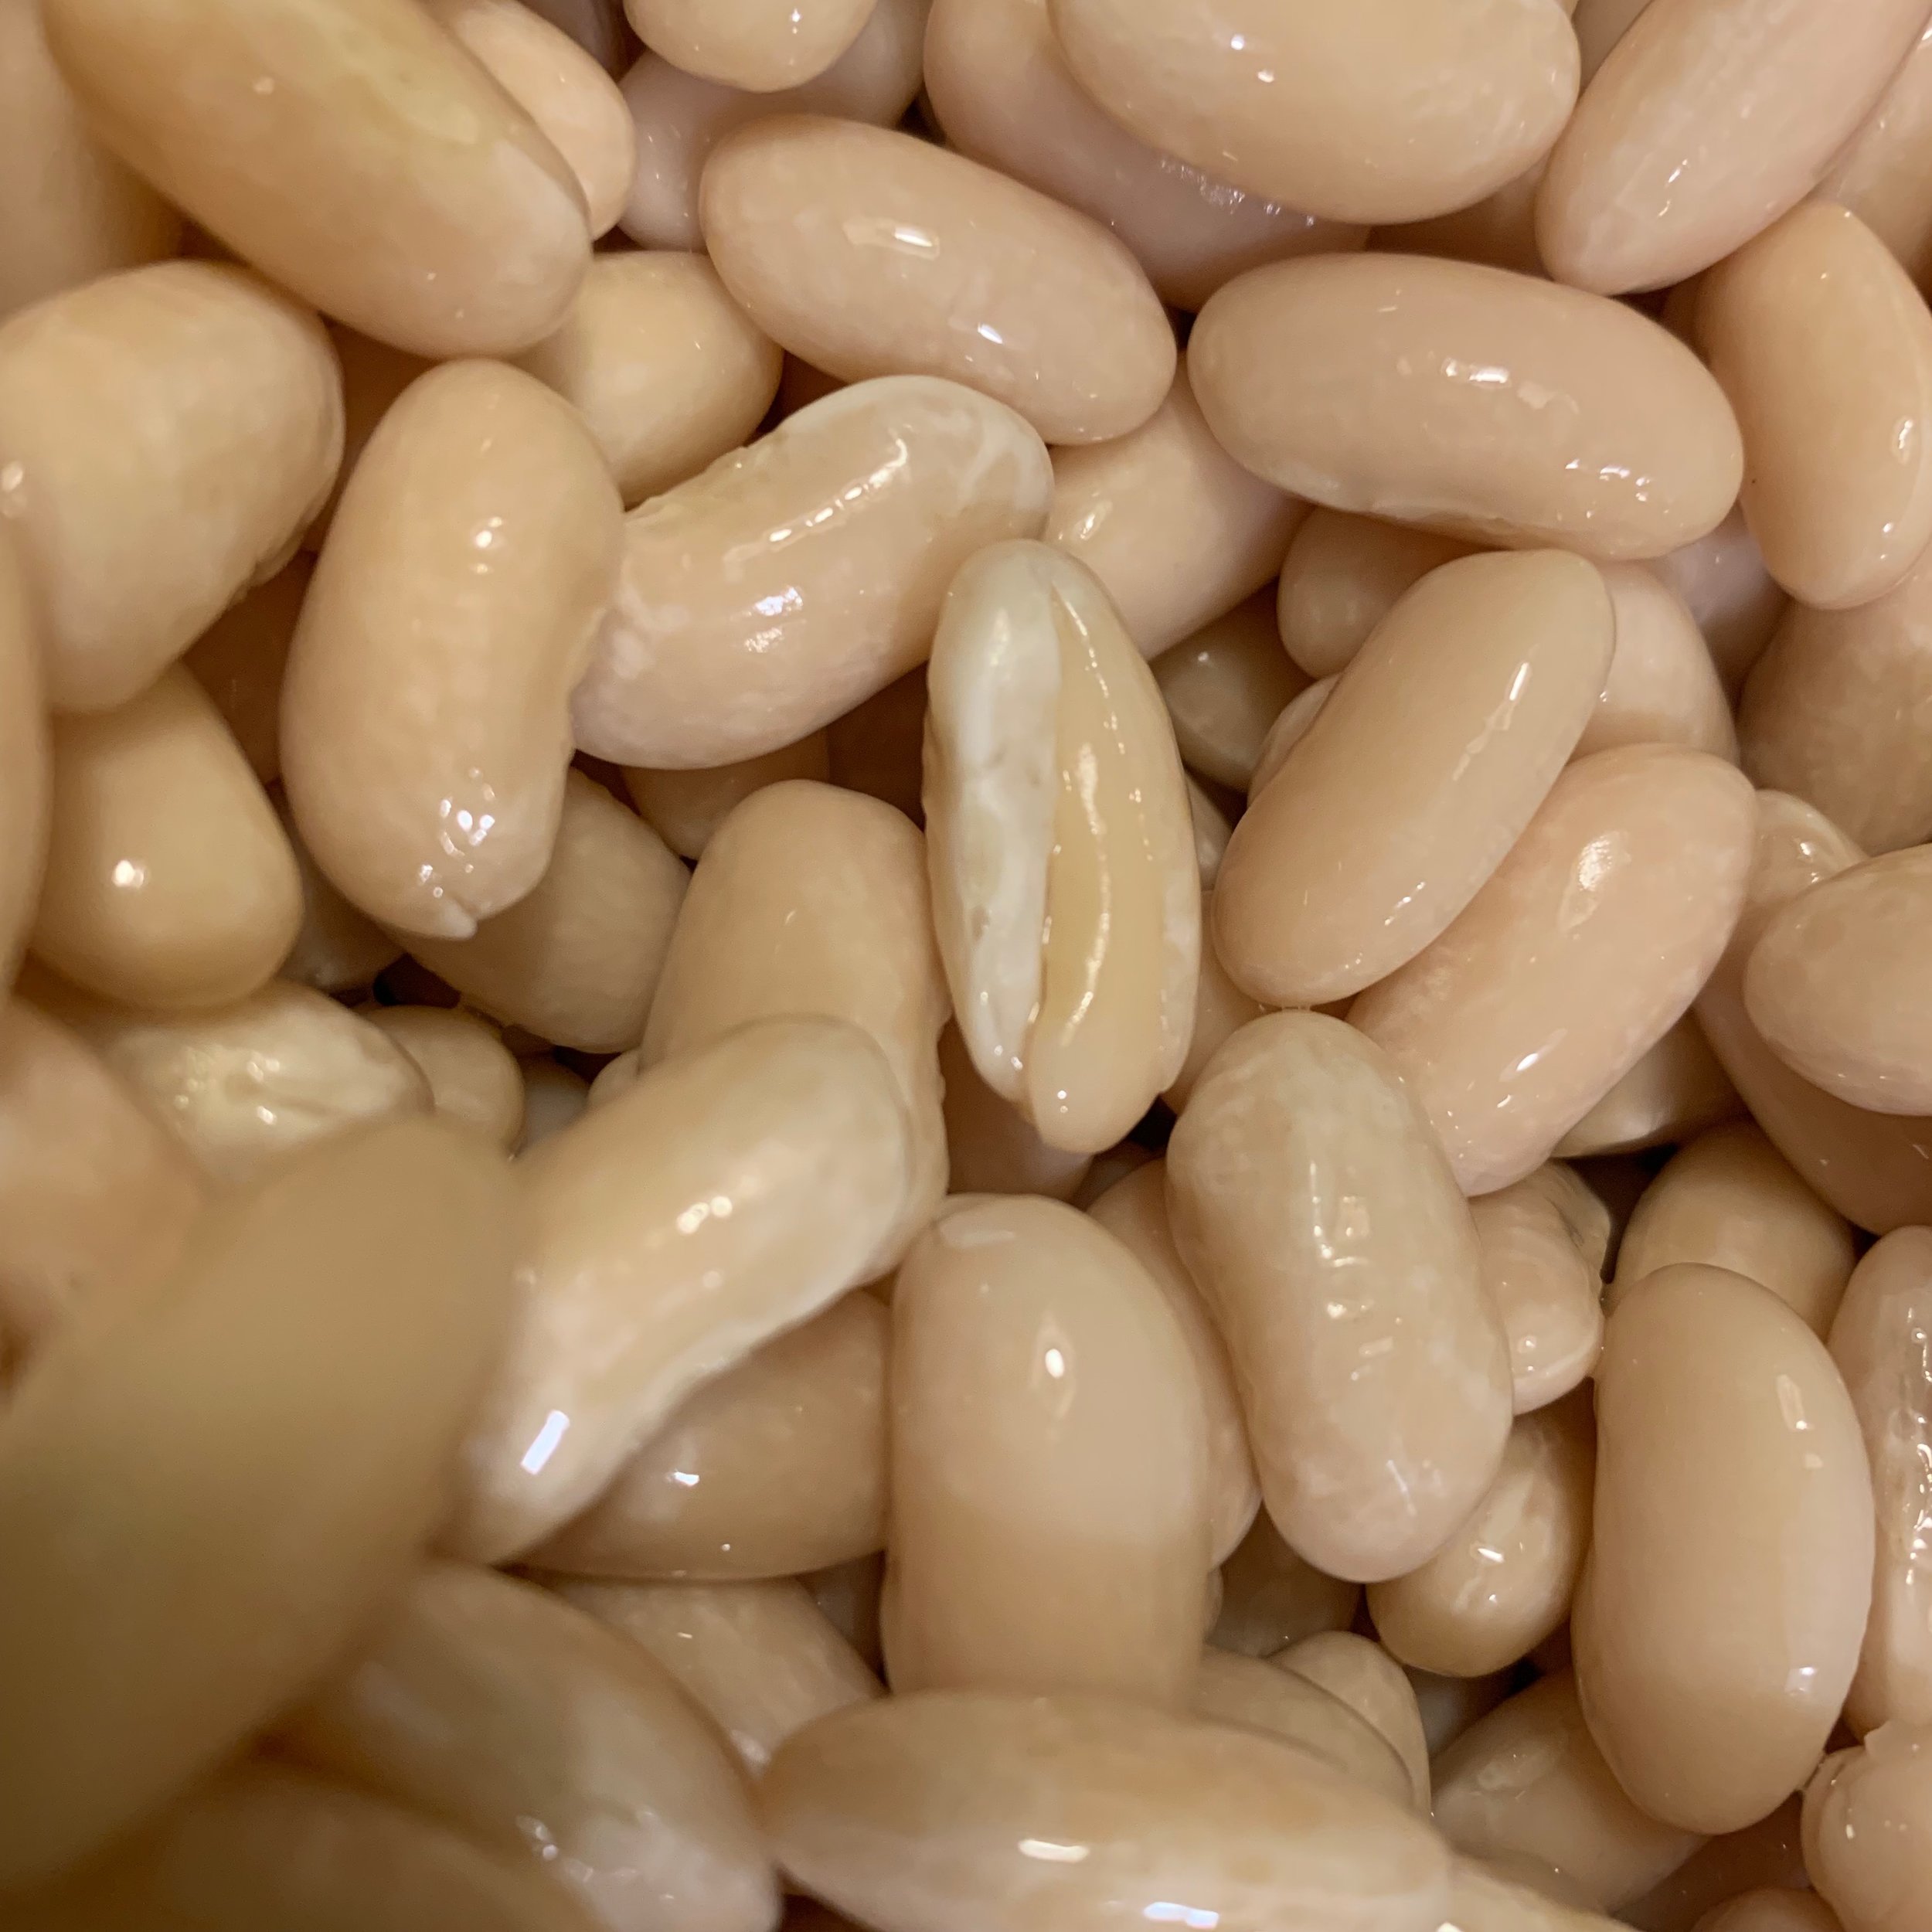 soak your beans in warm water with baking soda and see if you can get them to sprout